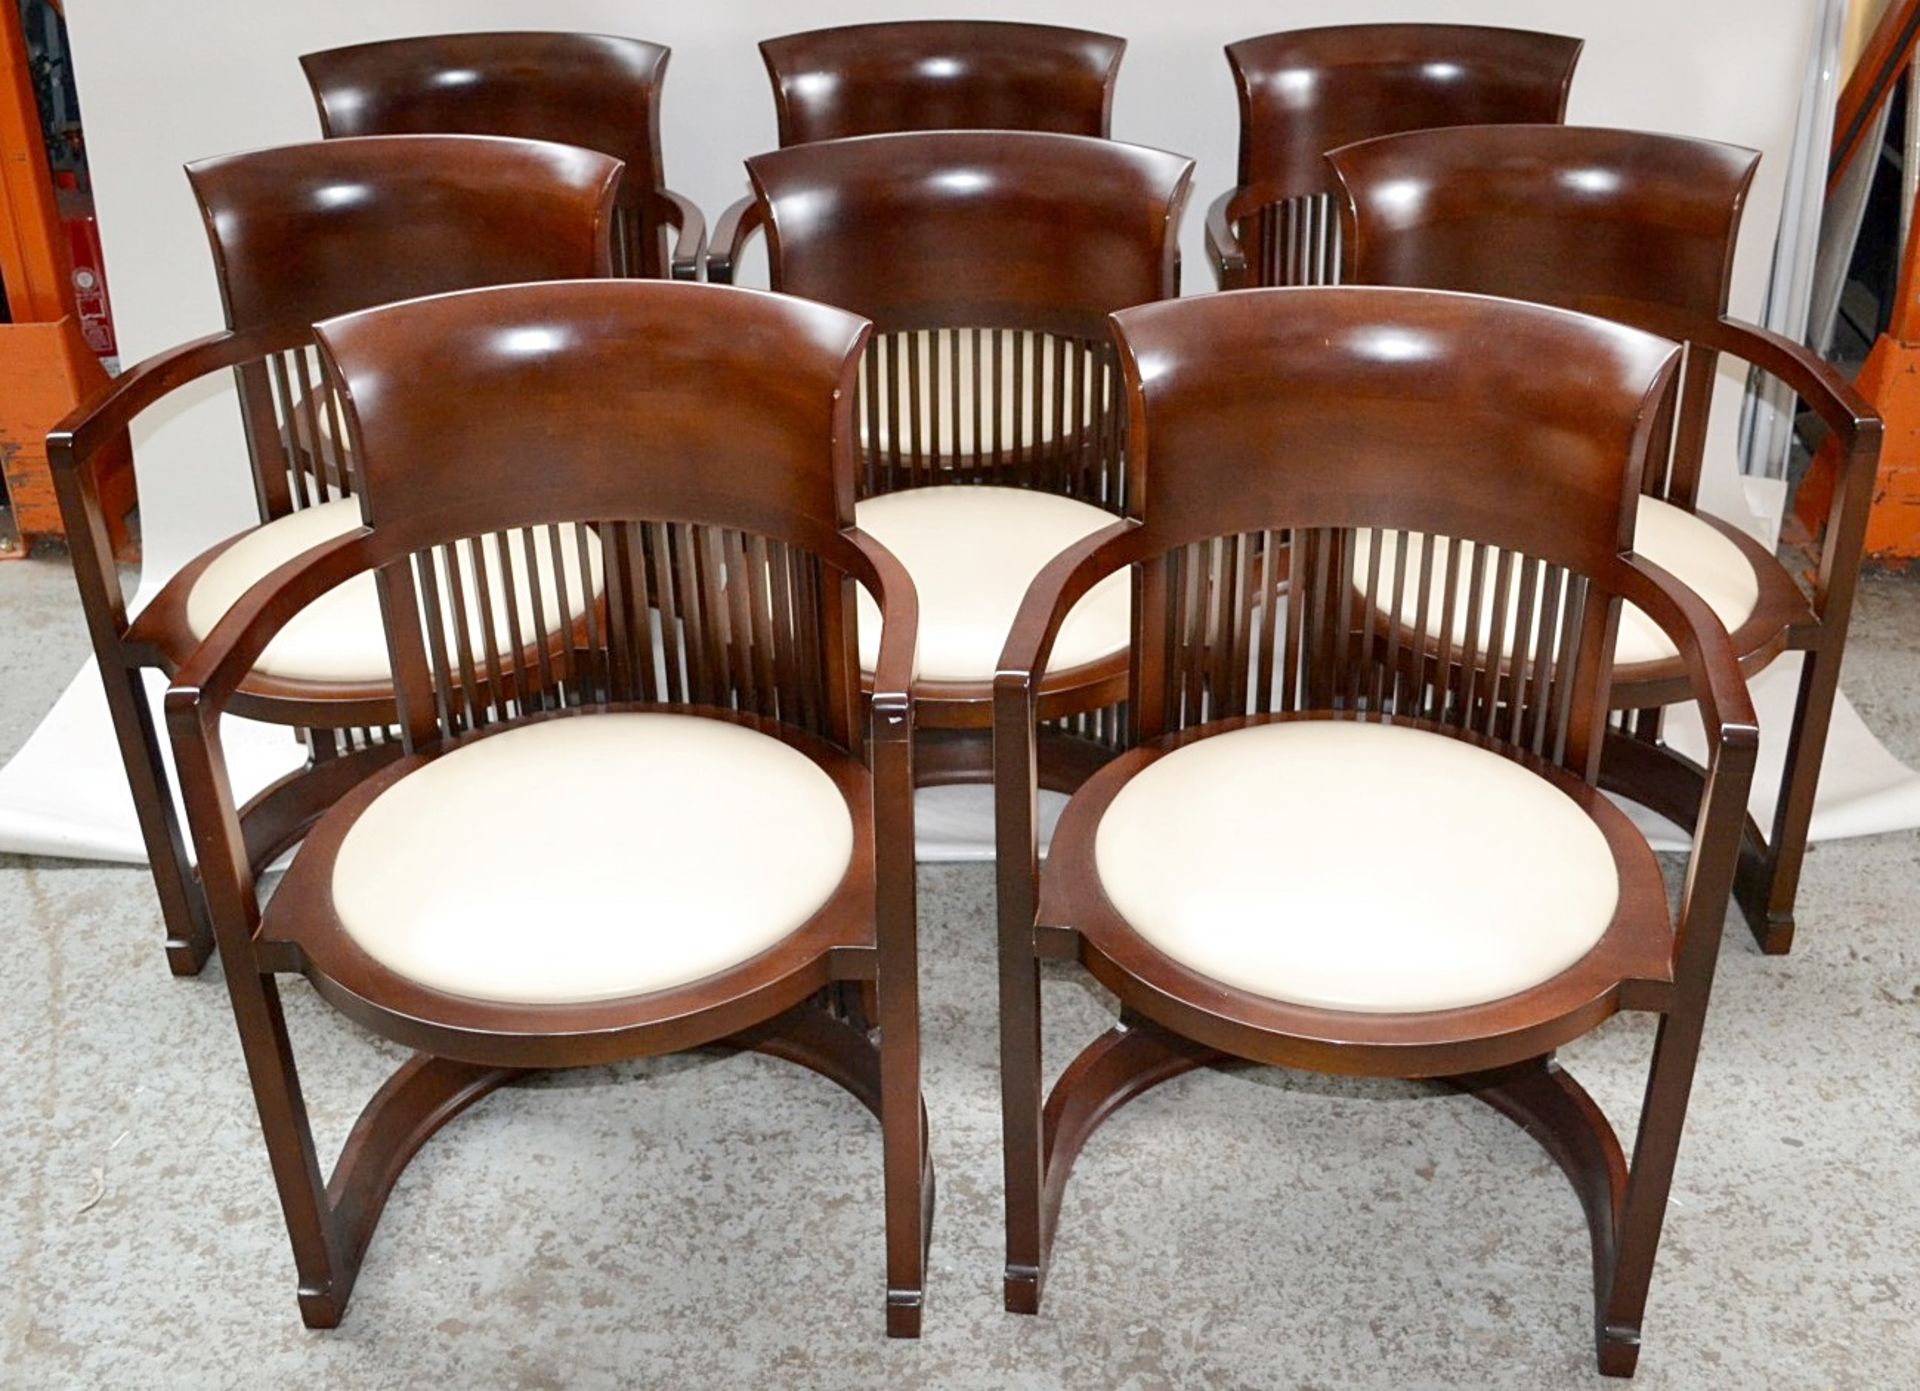 1 x Large Wooden Dining Table In The Style Of Frank Lloyd Wright - Includes 8 x Dining Armchairs - - Image 4 of 19